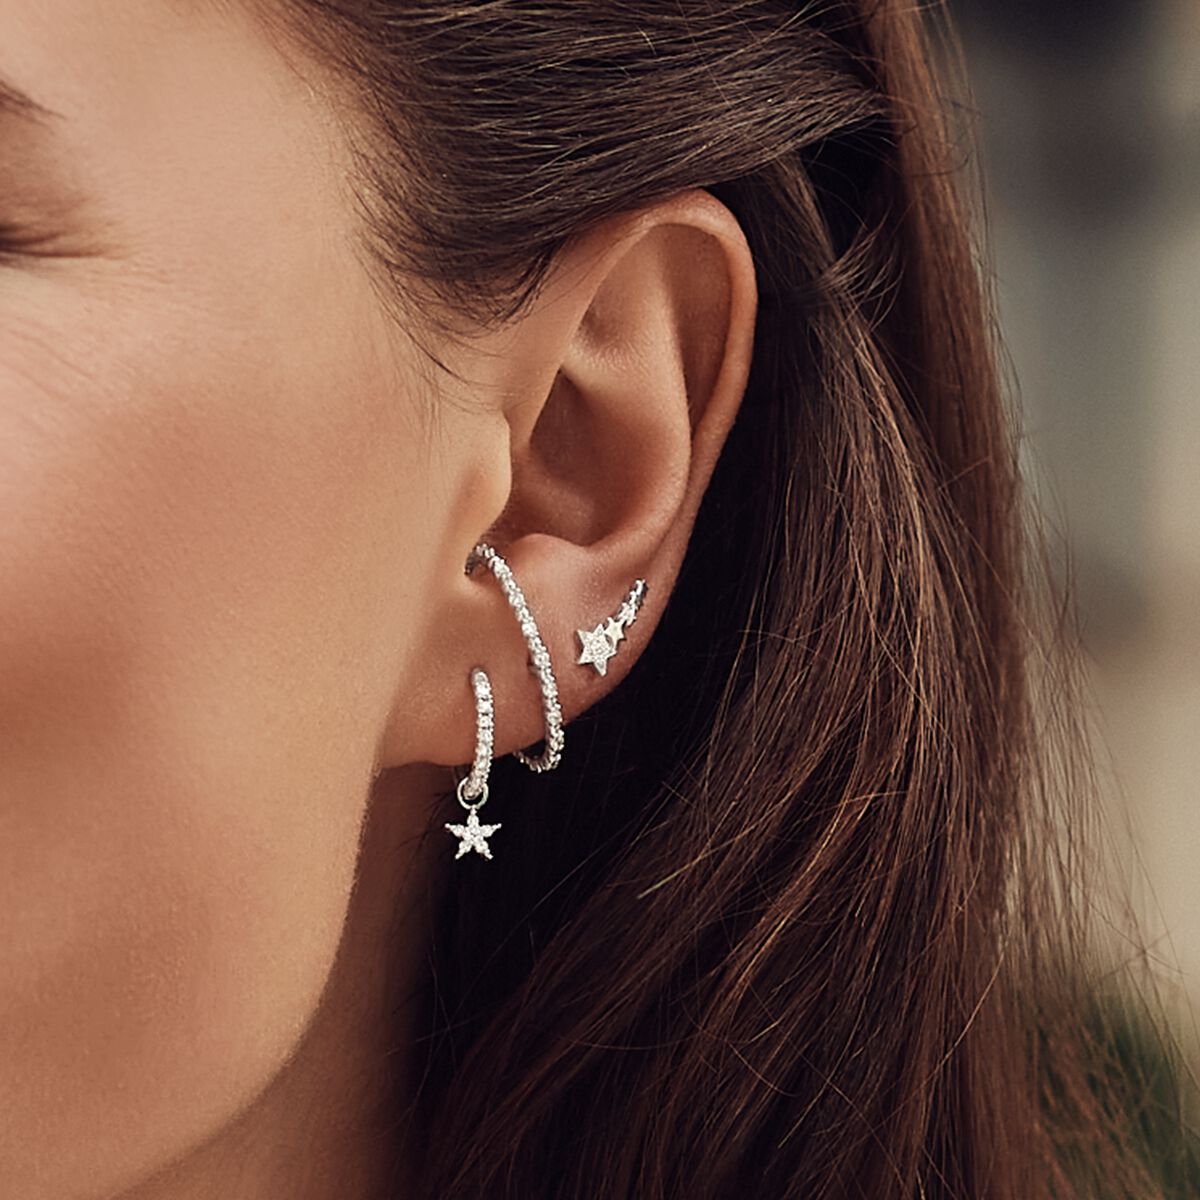 Conspicuous silver ear climbers – THOMAS SABO